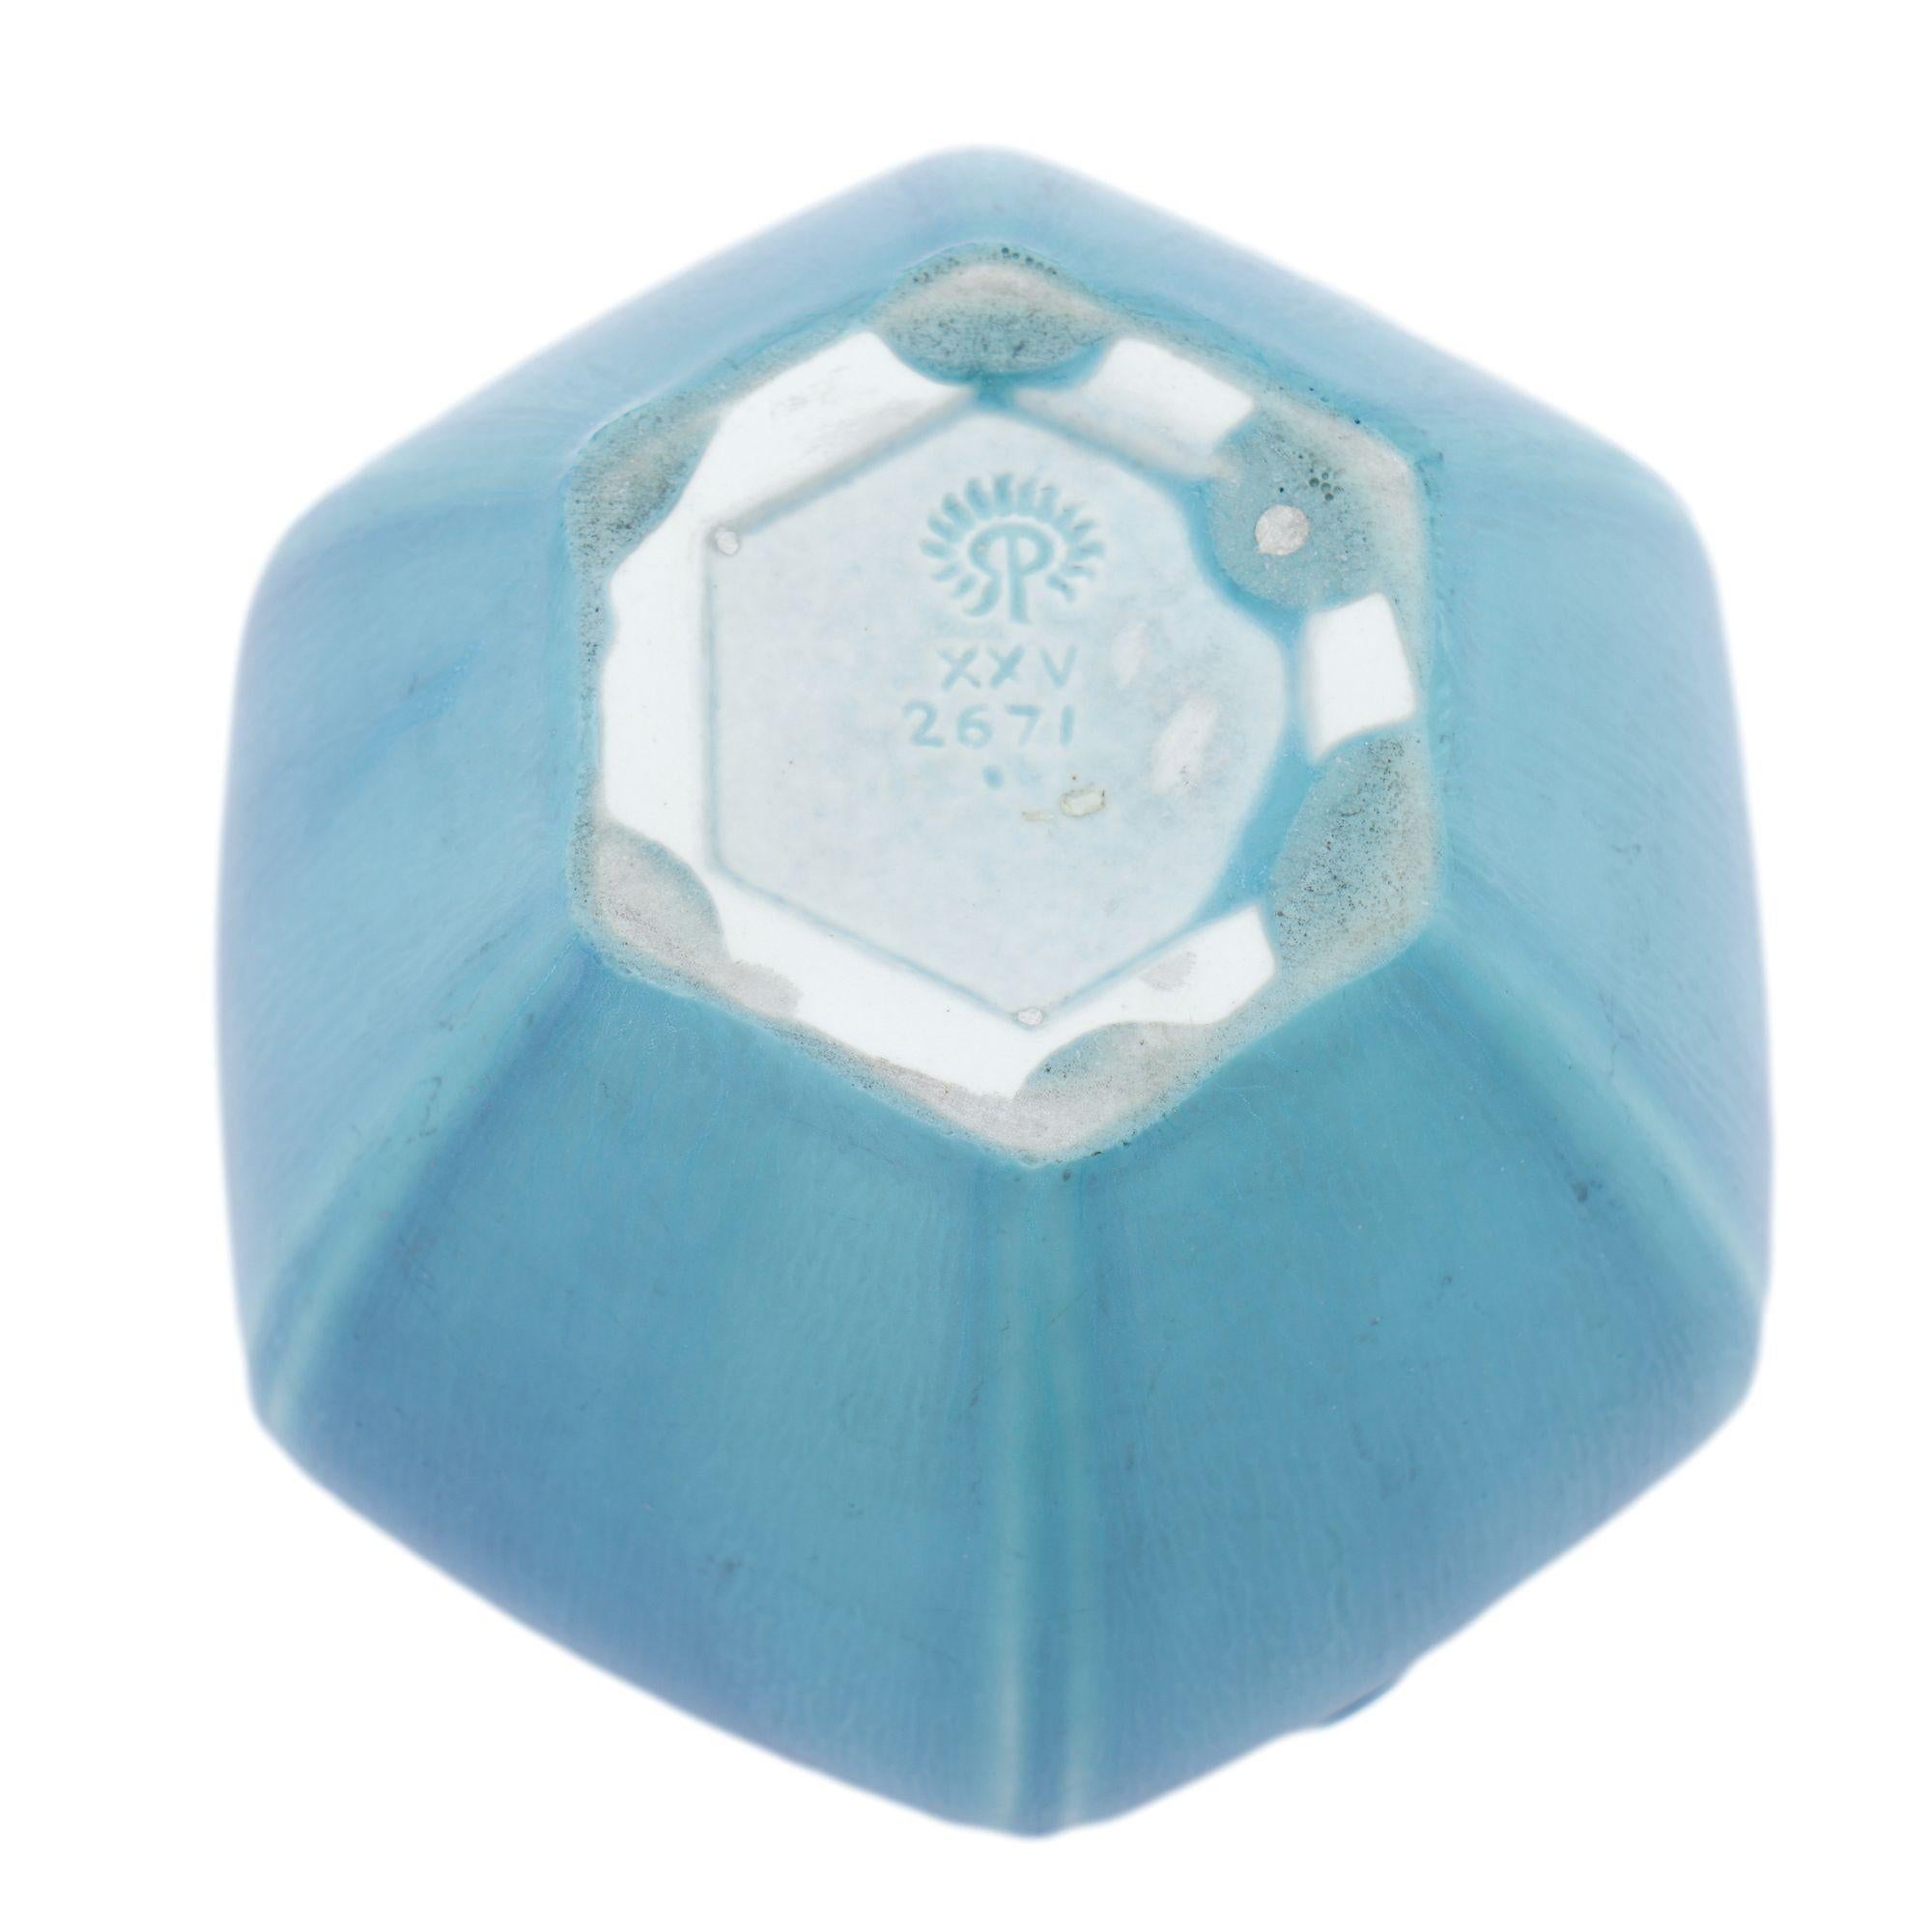 Rookwood hexagonal ceramic vase in a light blue matte glaze, 1925 In Excellent Condition For Sale In Kenilworth, IL